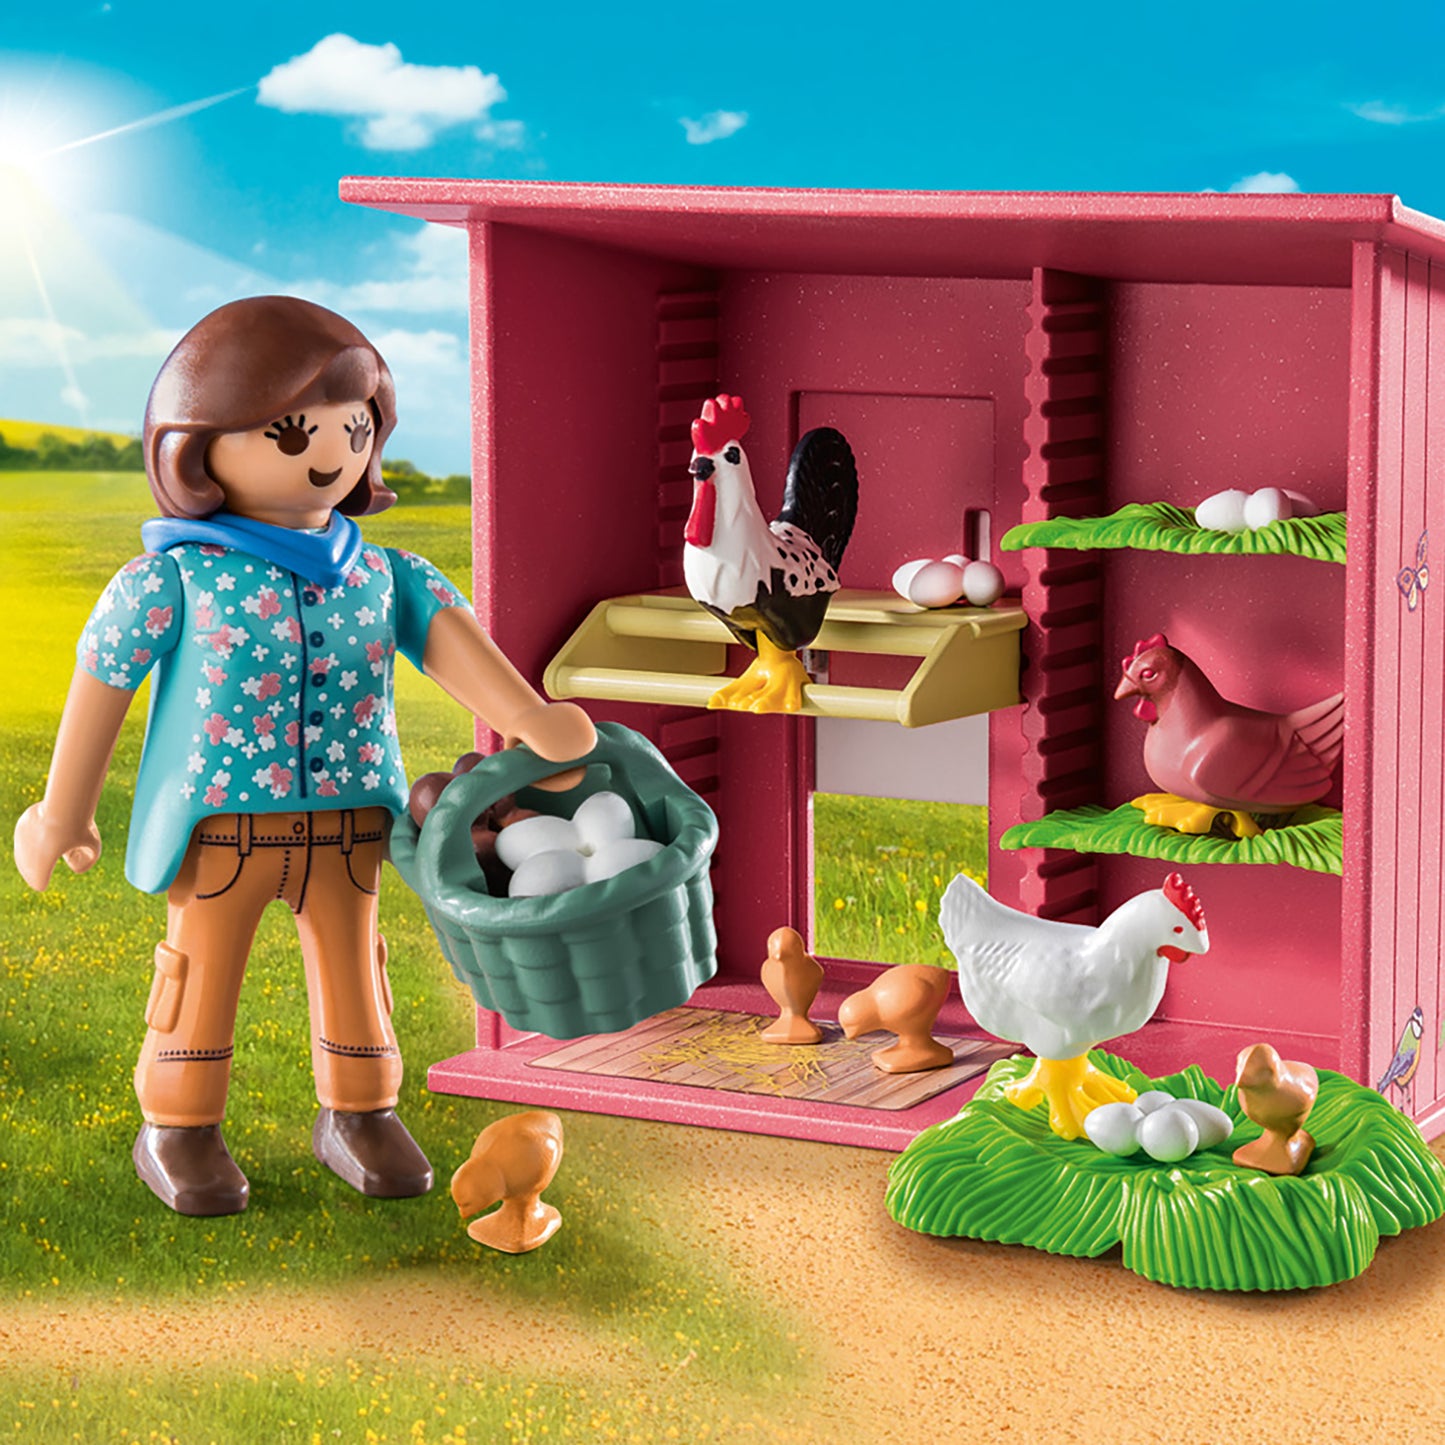 Hen House | Country | Eco-Plastic | Open-Ended Play For Kids